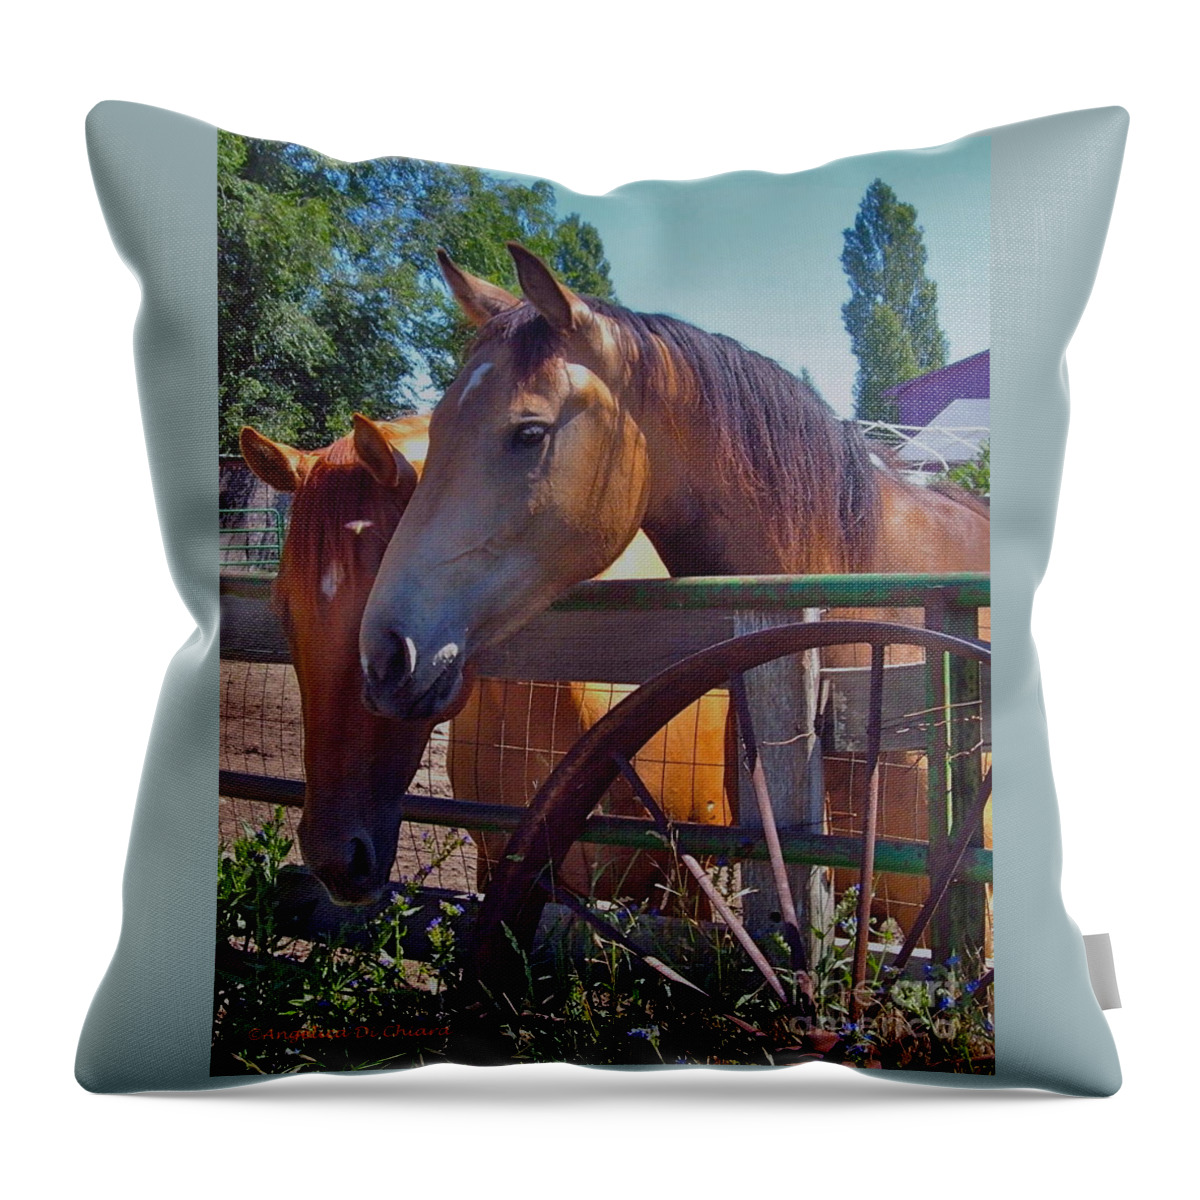 Cityscape Throw Pillow featuring the photograph Horse by Italian Art